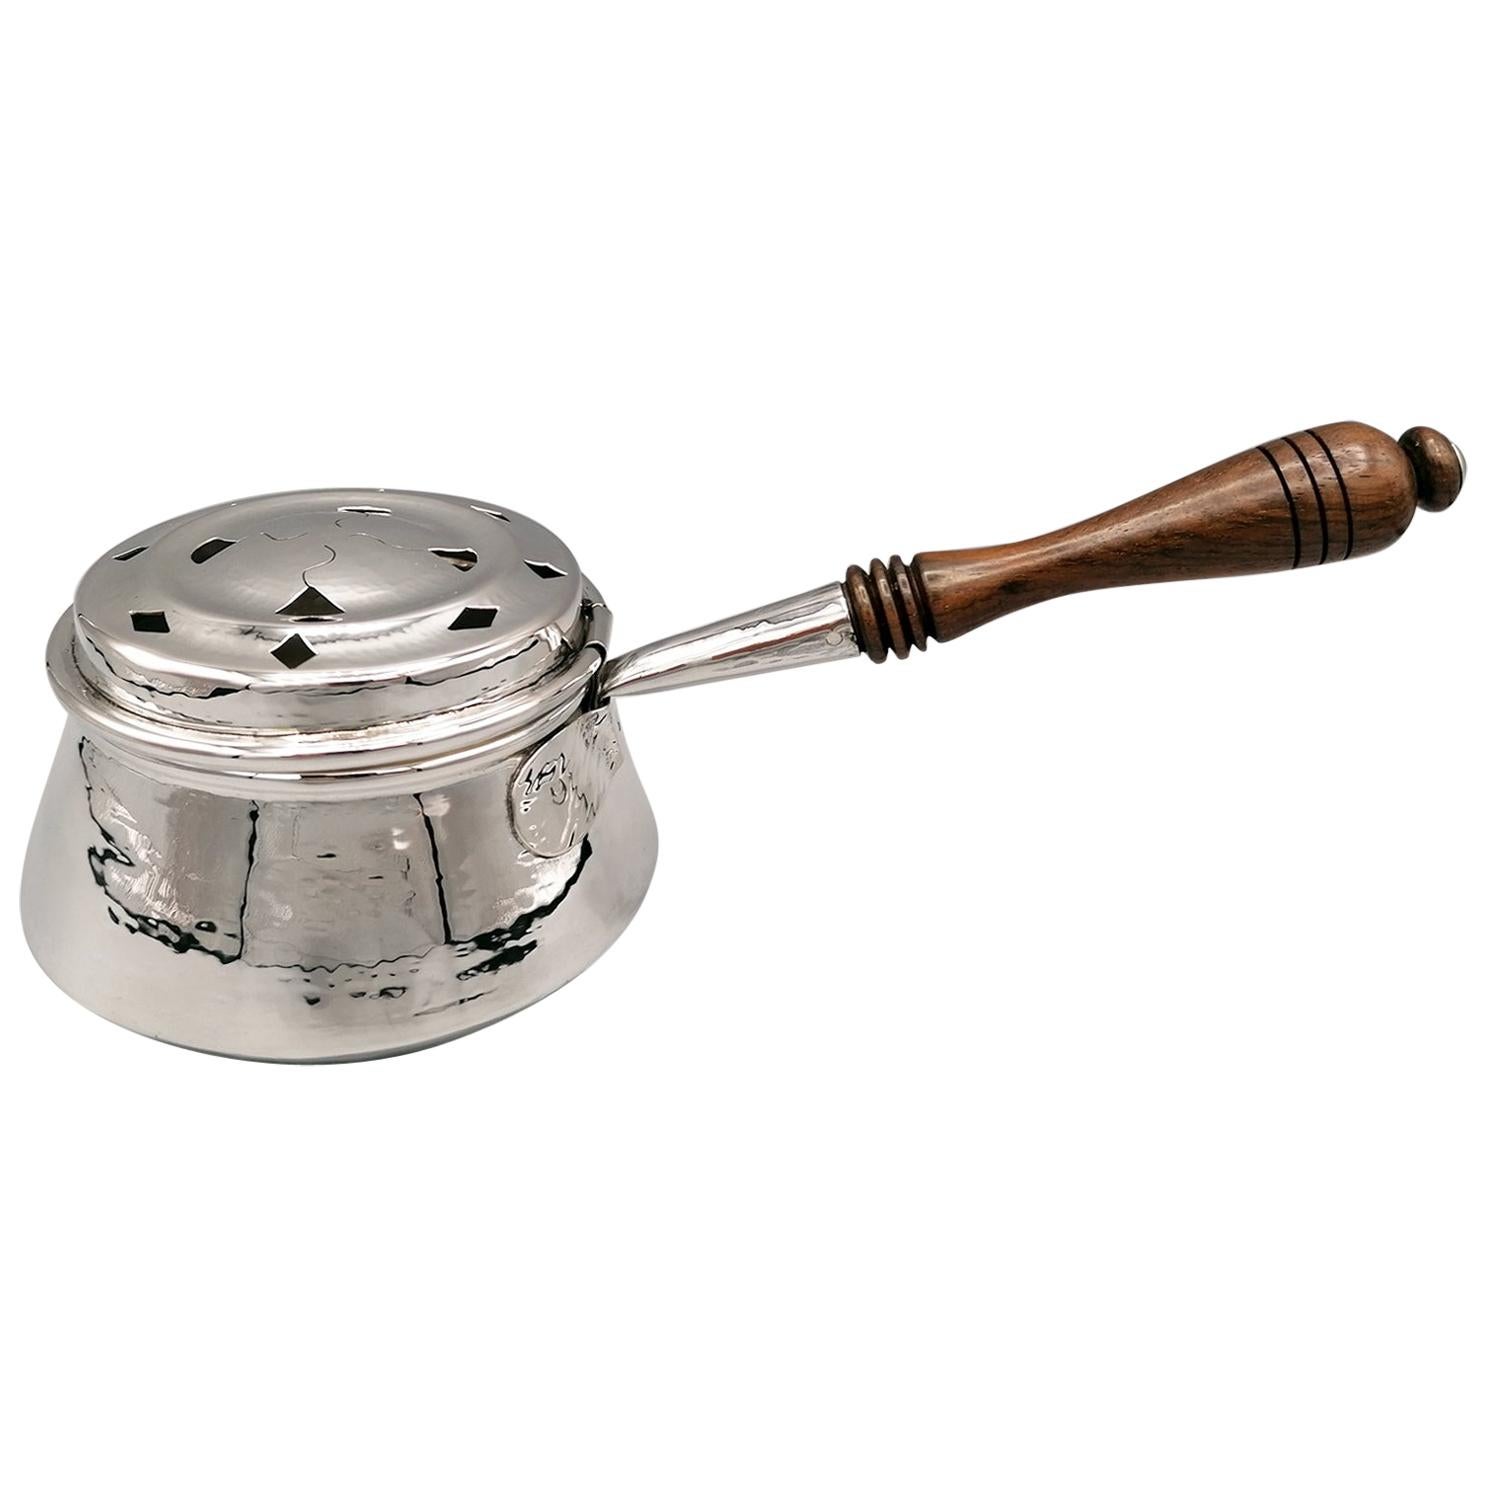 20th Century Italian Solid Silver Warmer with Wooden Handle